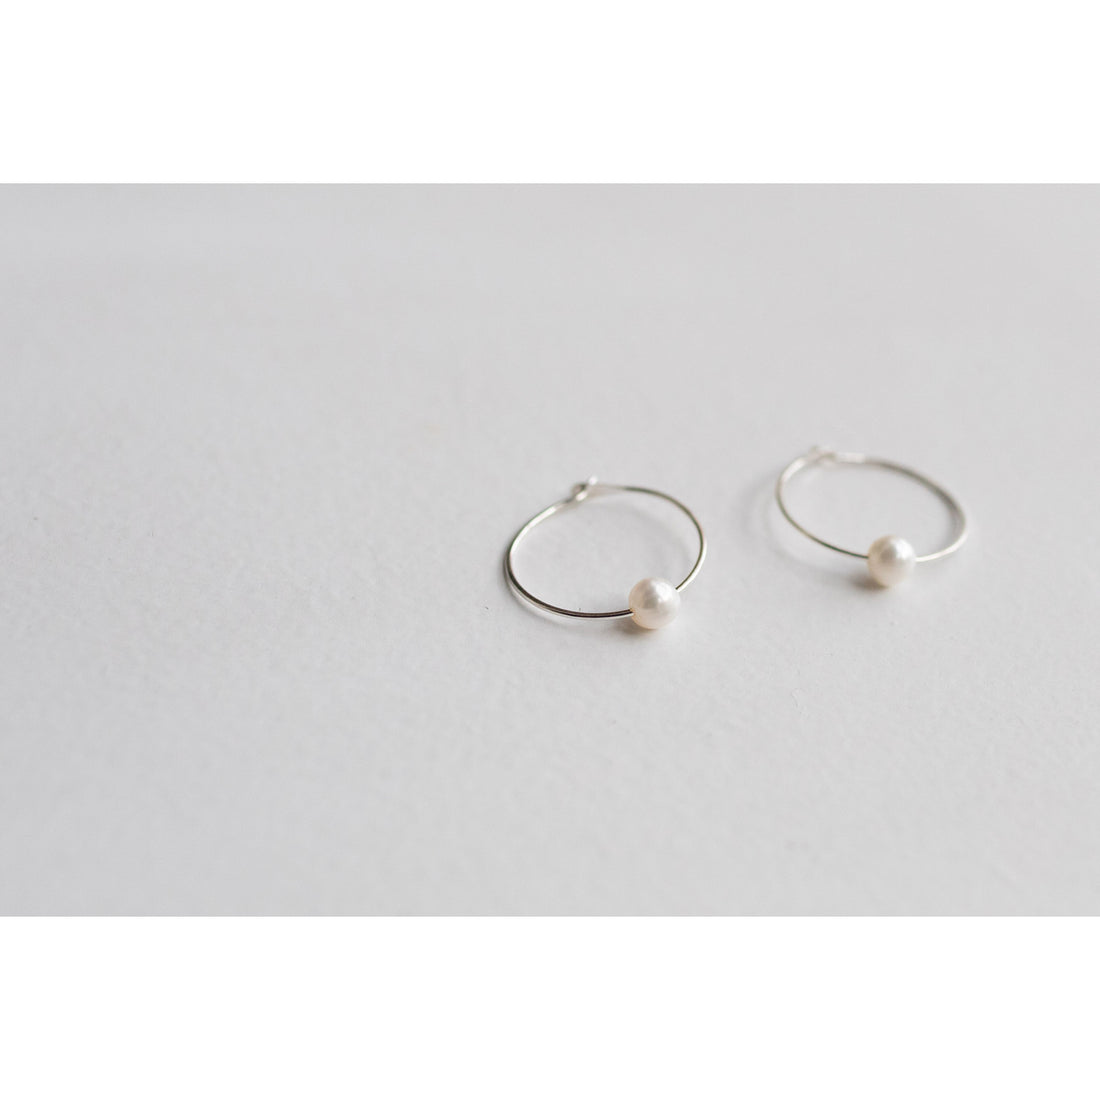 Melissa Joy Manning Large Silver Hoops With Floating Single Pearl